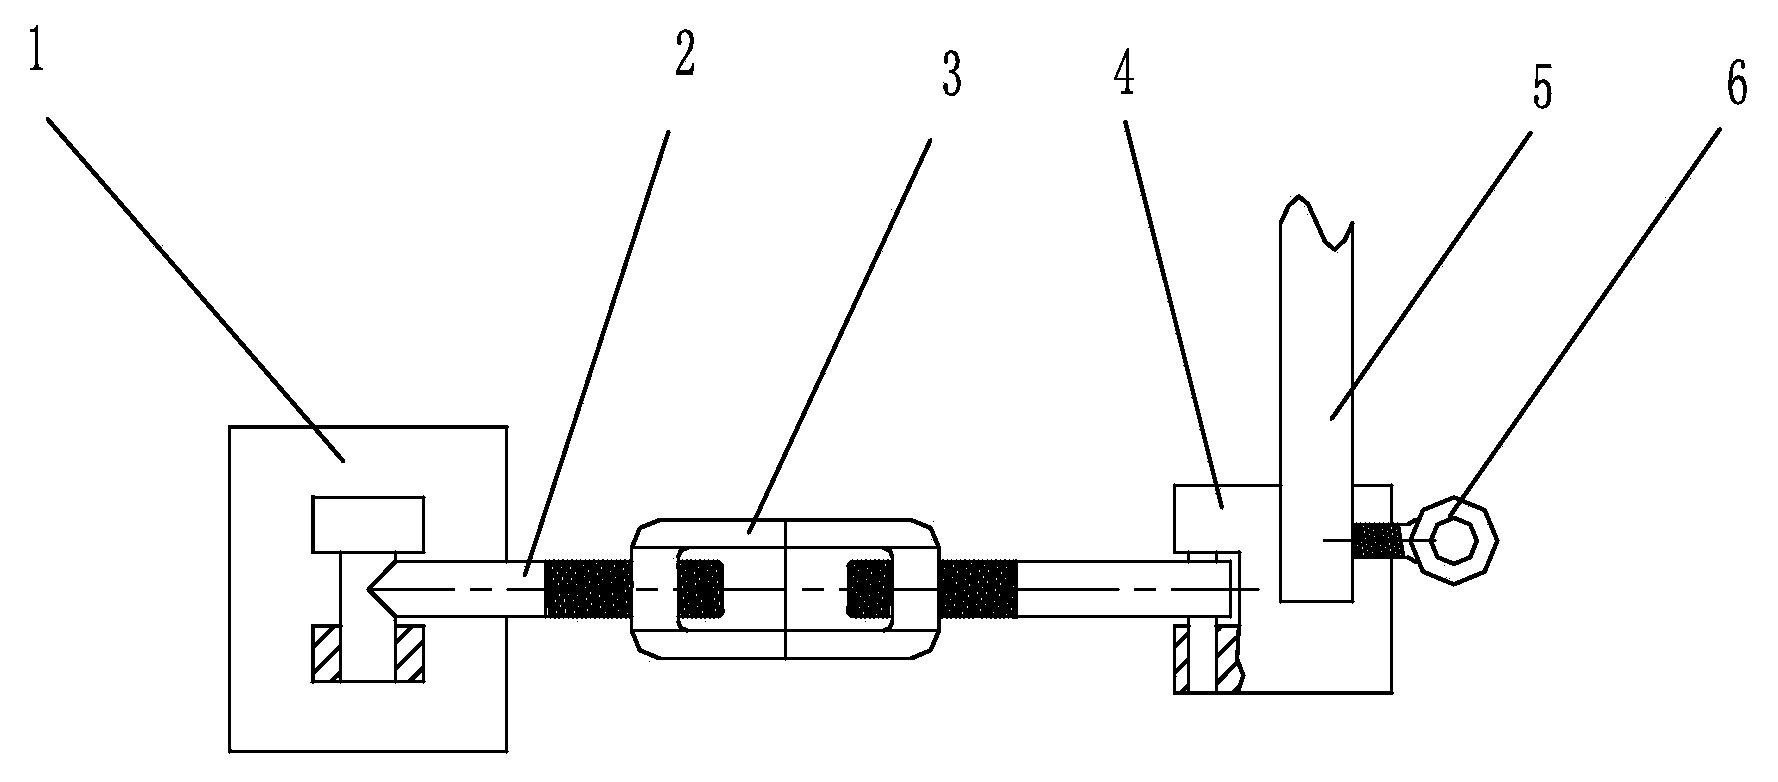 Mounting adjustment device for prefabricated wall panel